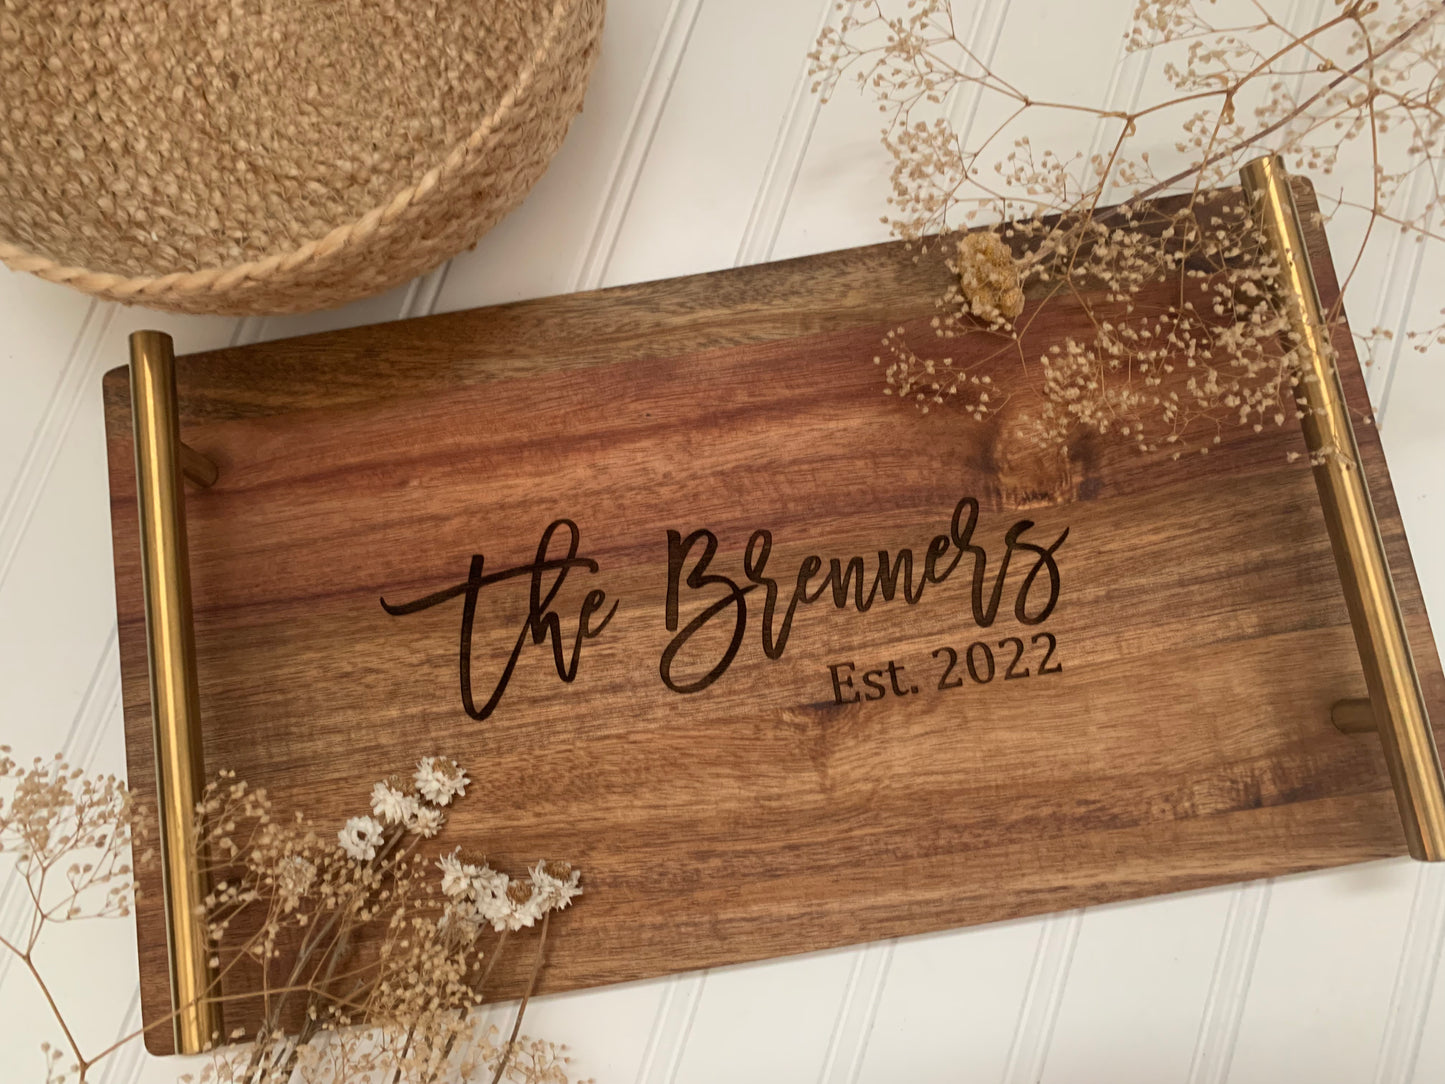 Acacia Wood Serving Tray - Personalized